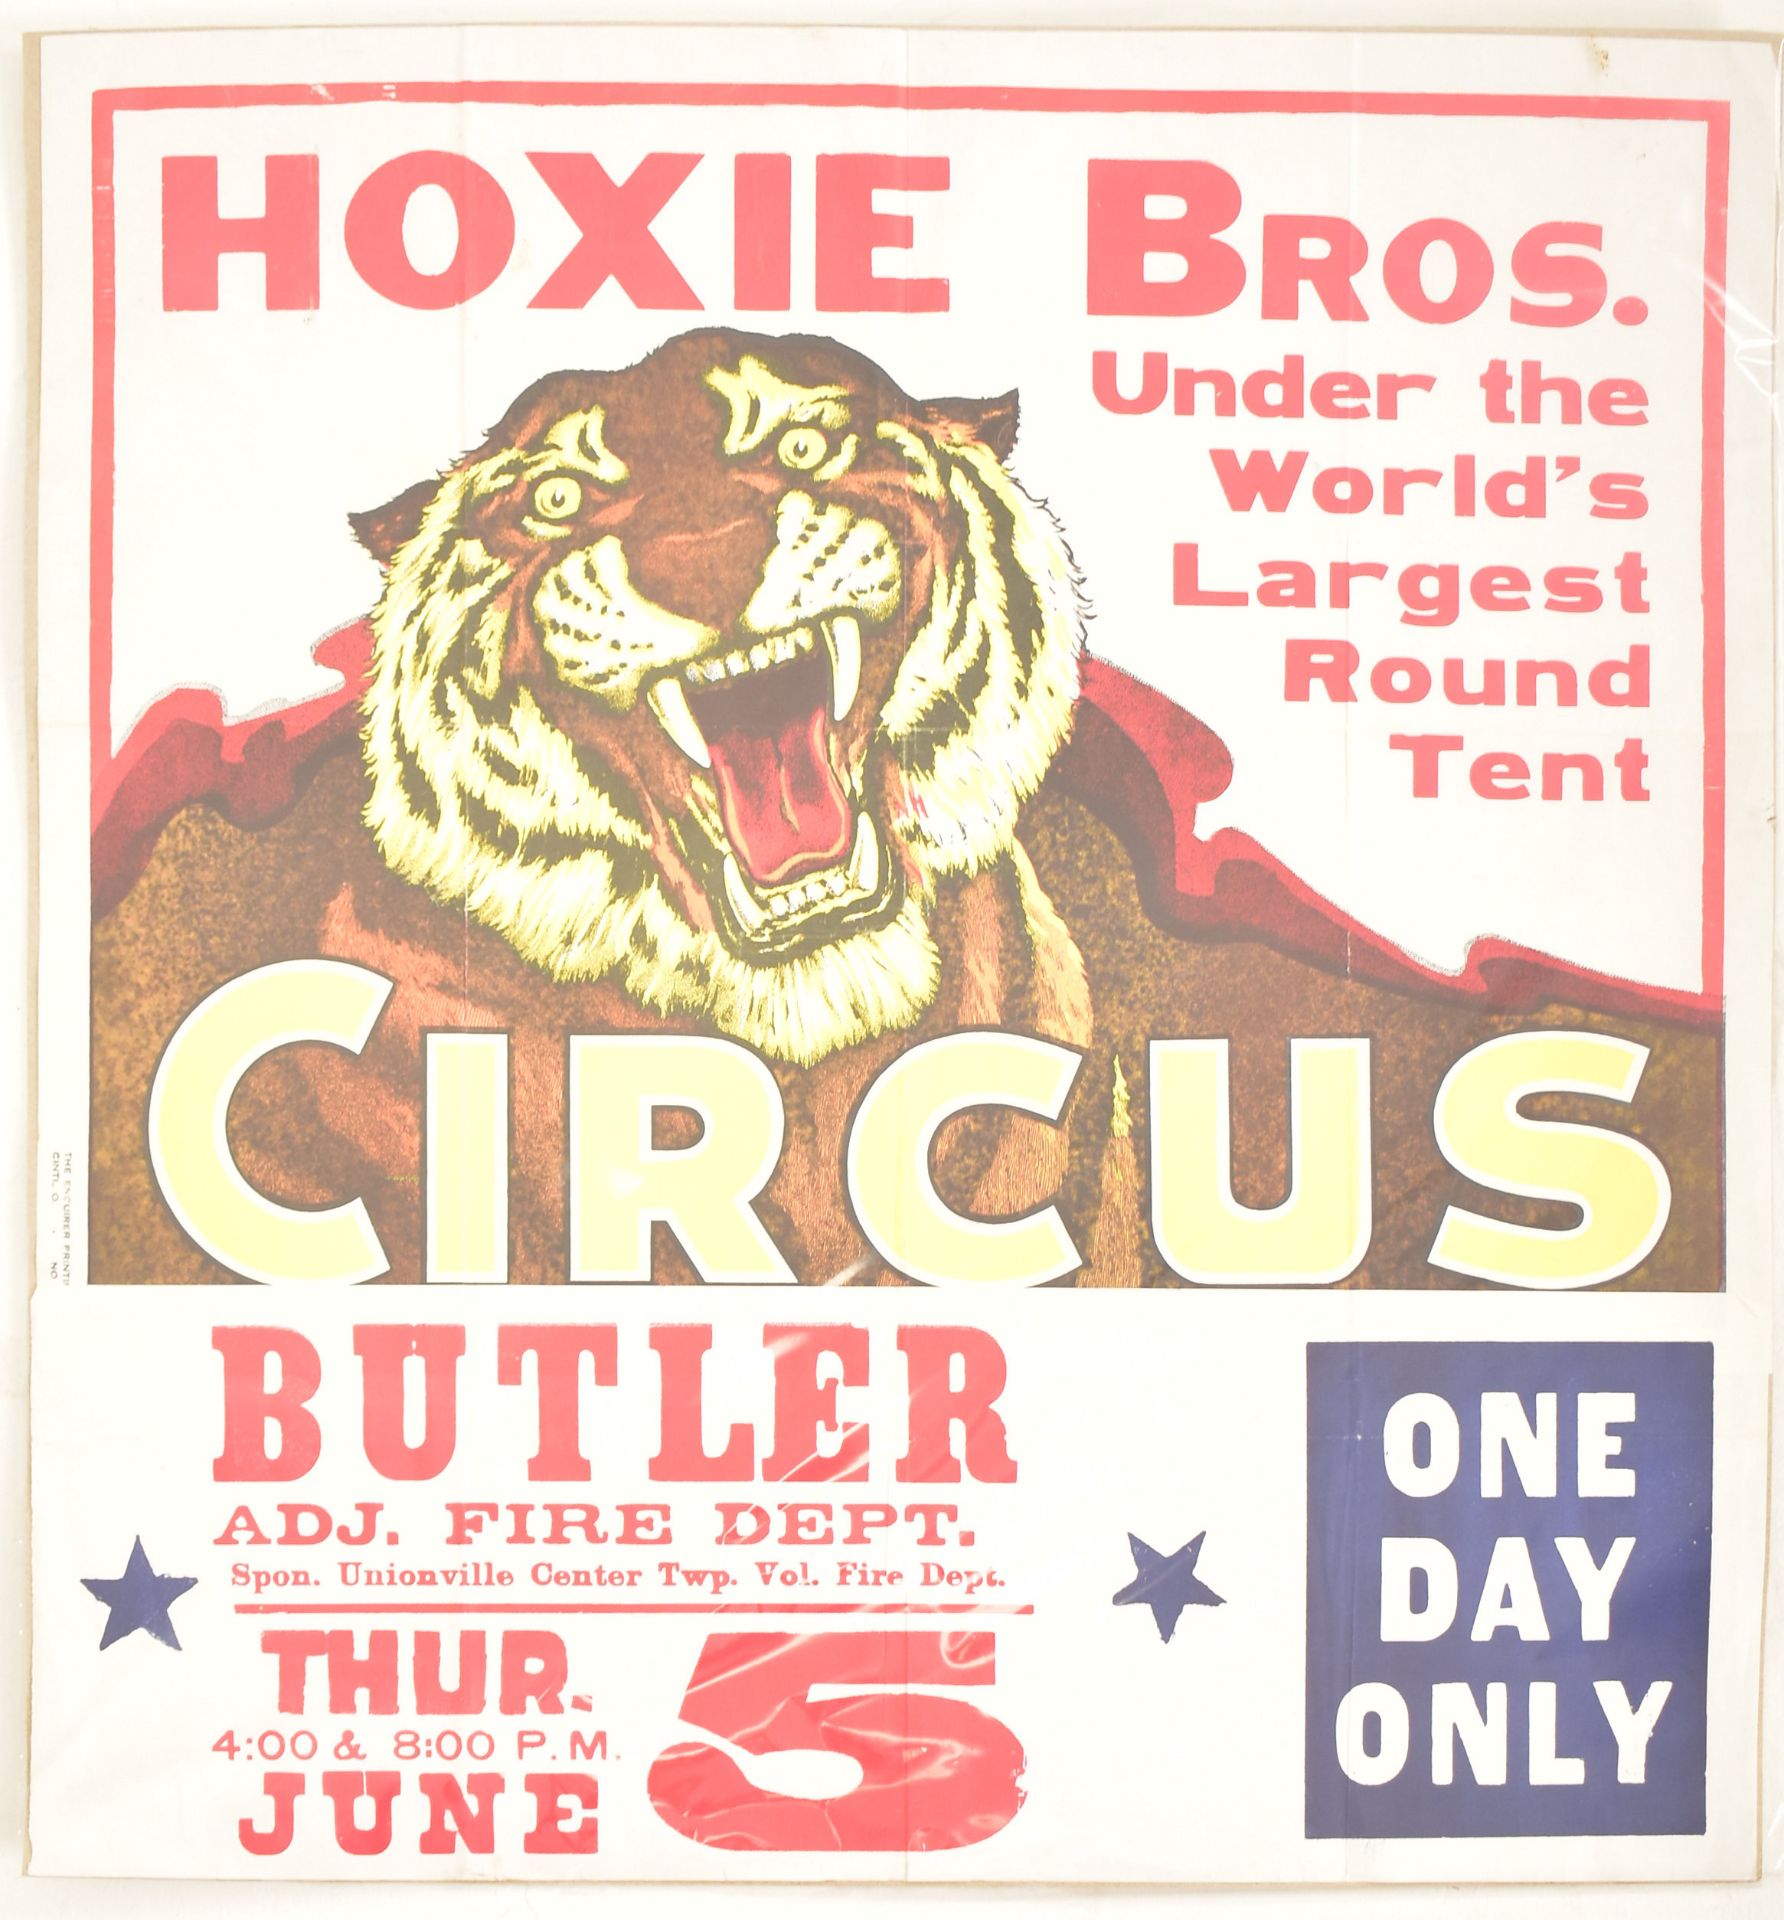 HOXIE BROS. CIRCUS - VINTAGE 20TH CENTURY ADVERTISING POSTER